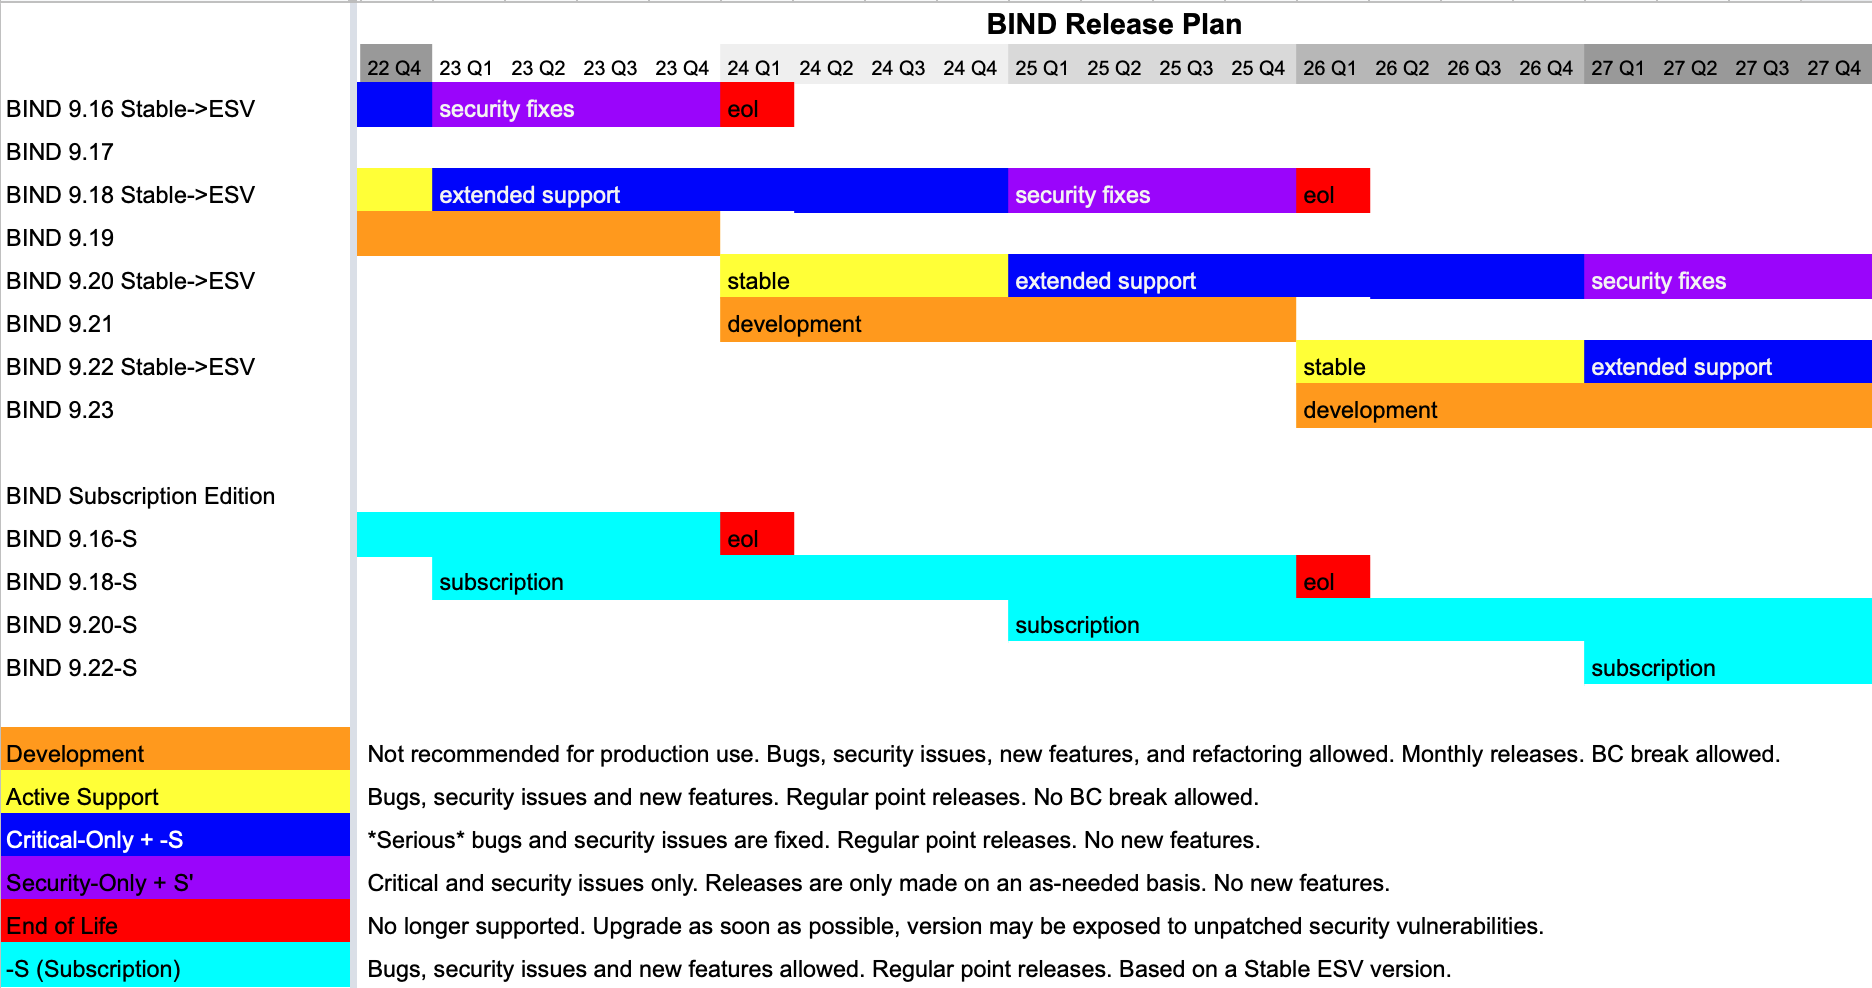 Bar chart showing BIND 9 release plans